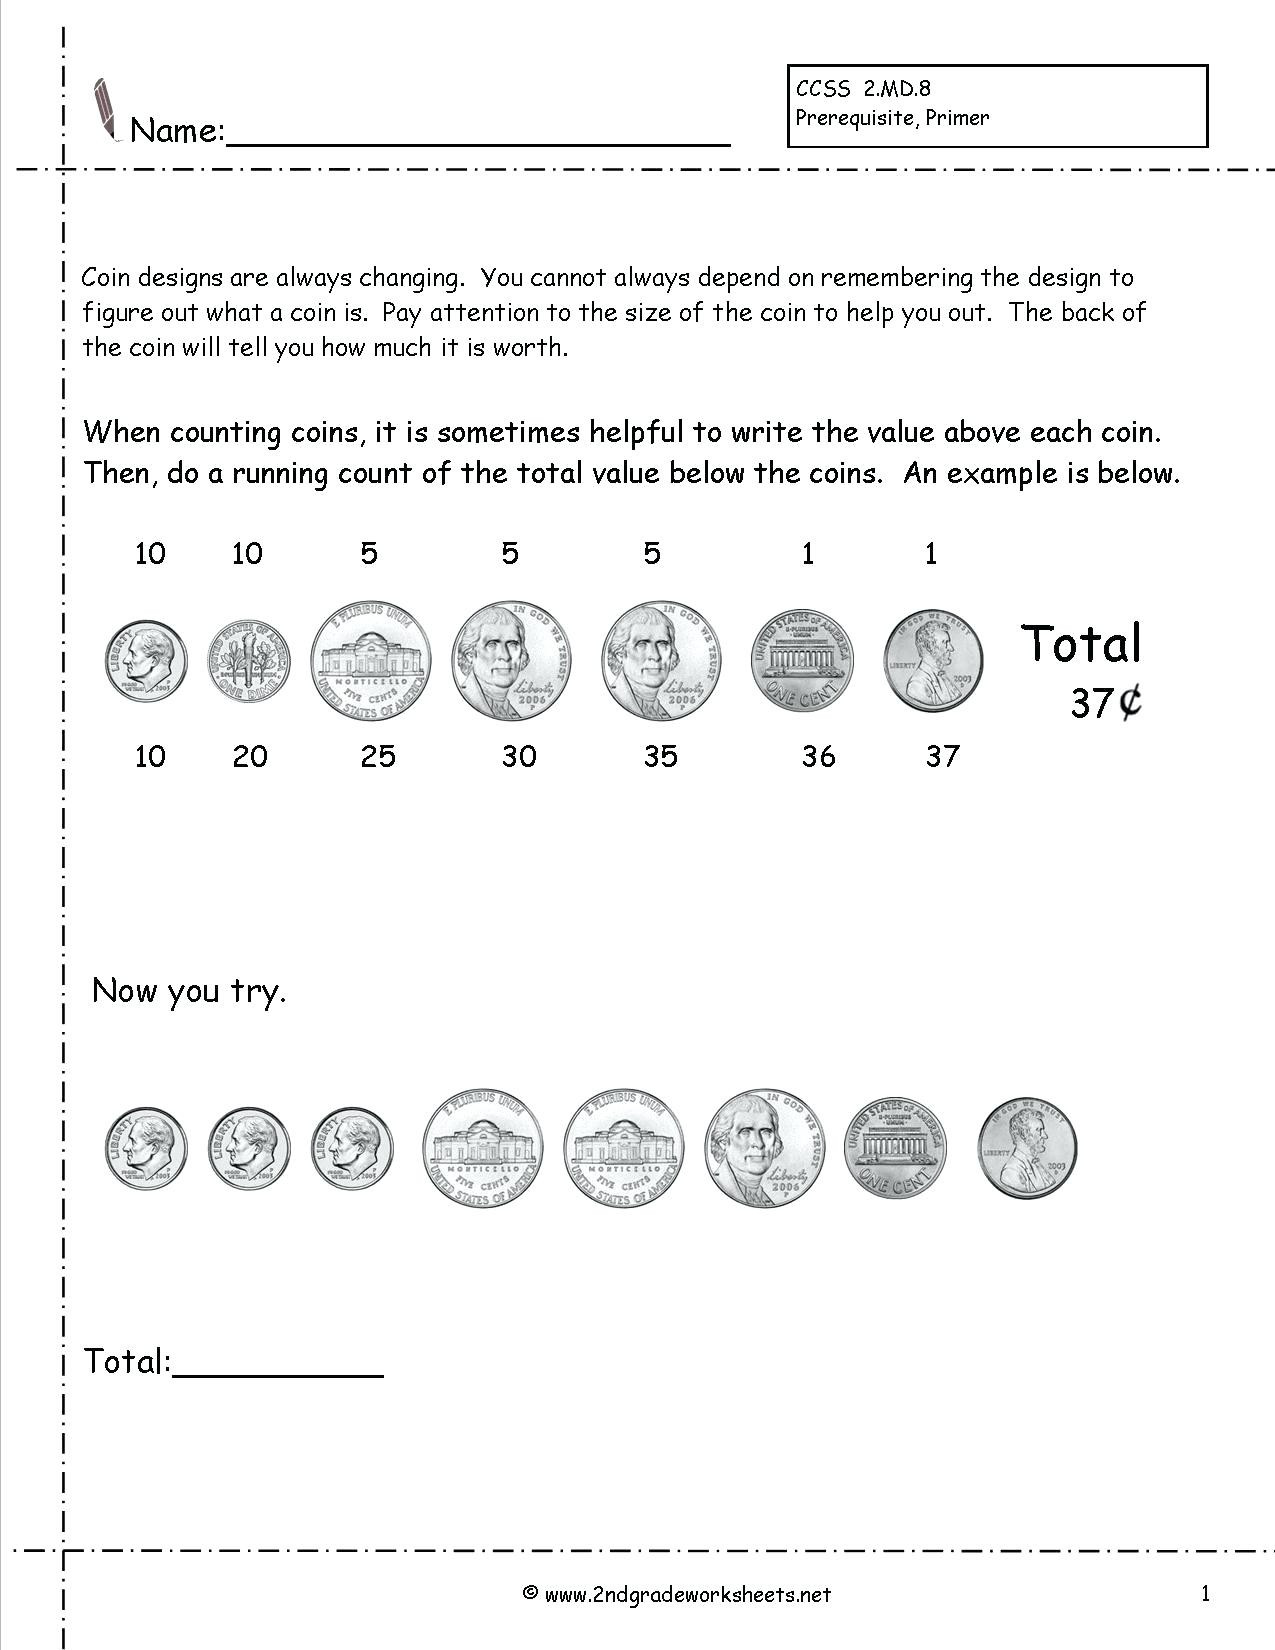 counting coins practice worksheet introduction